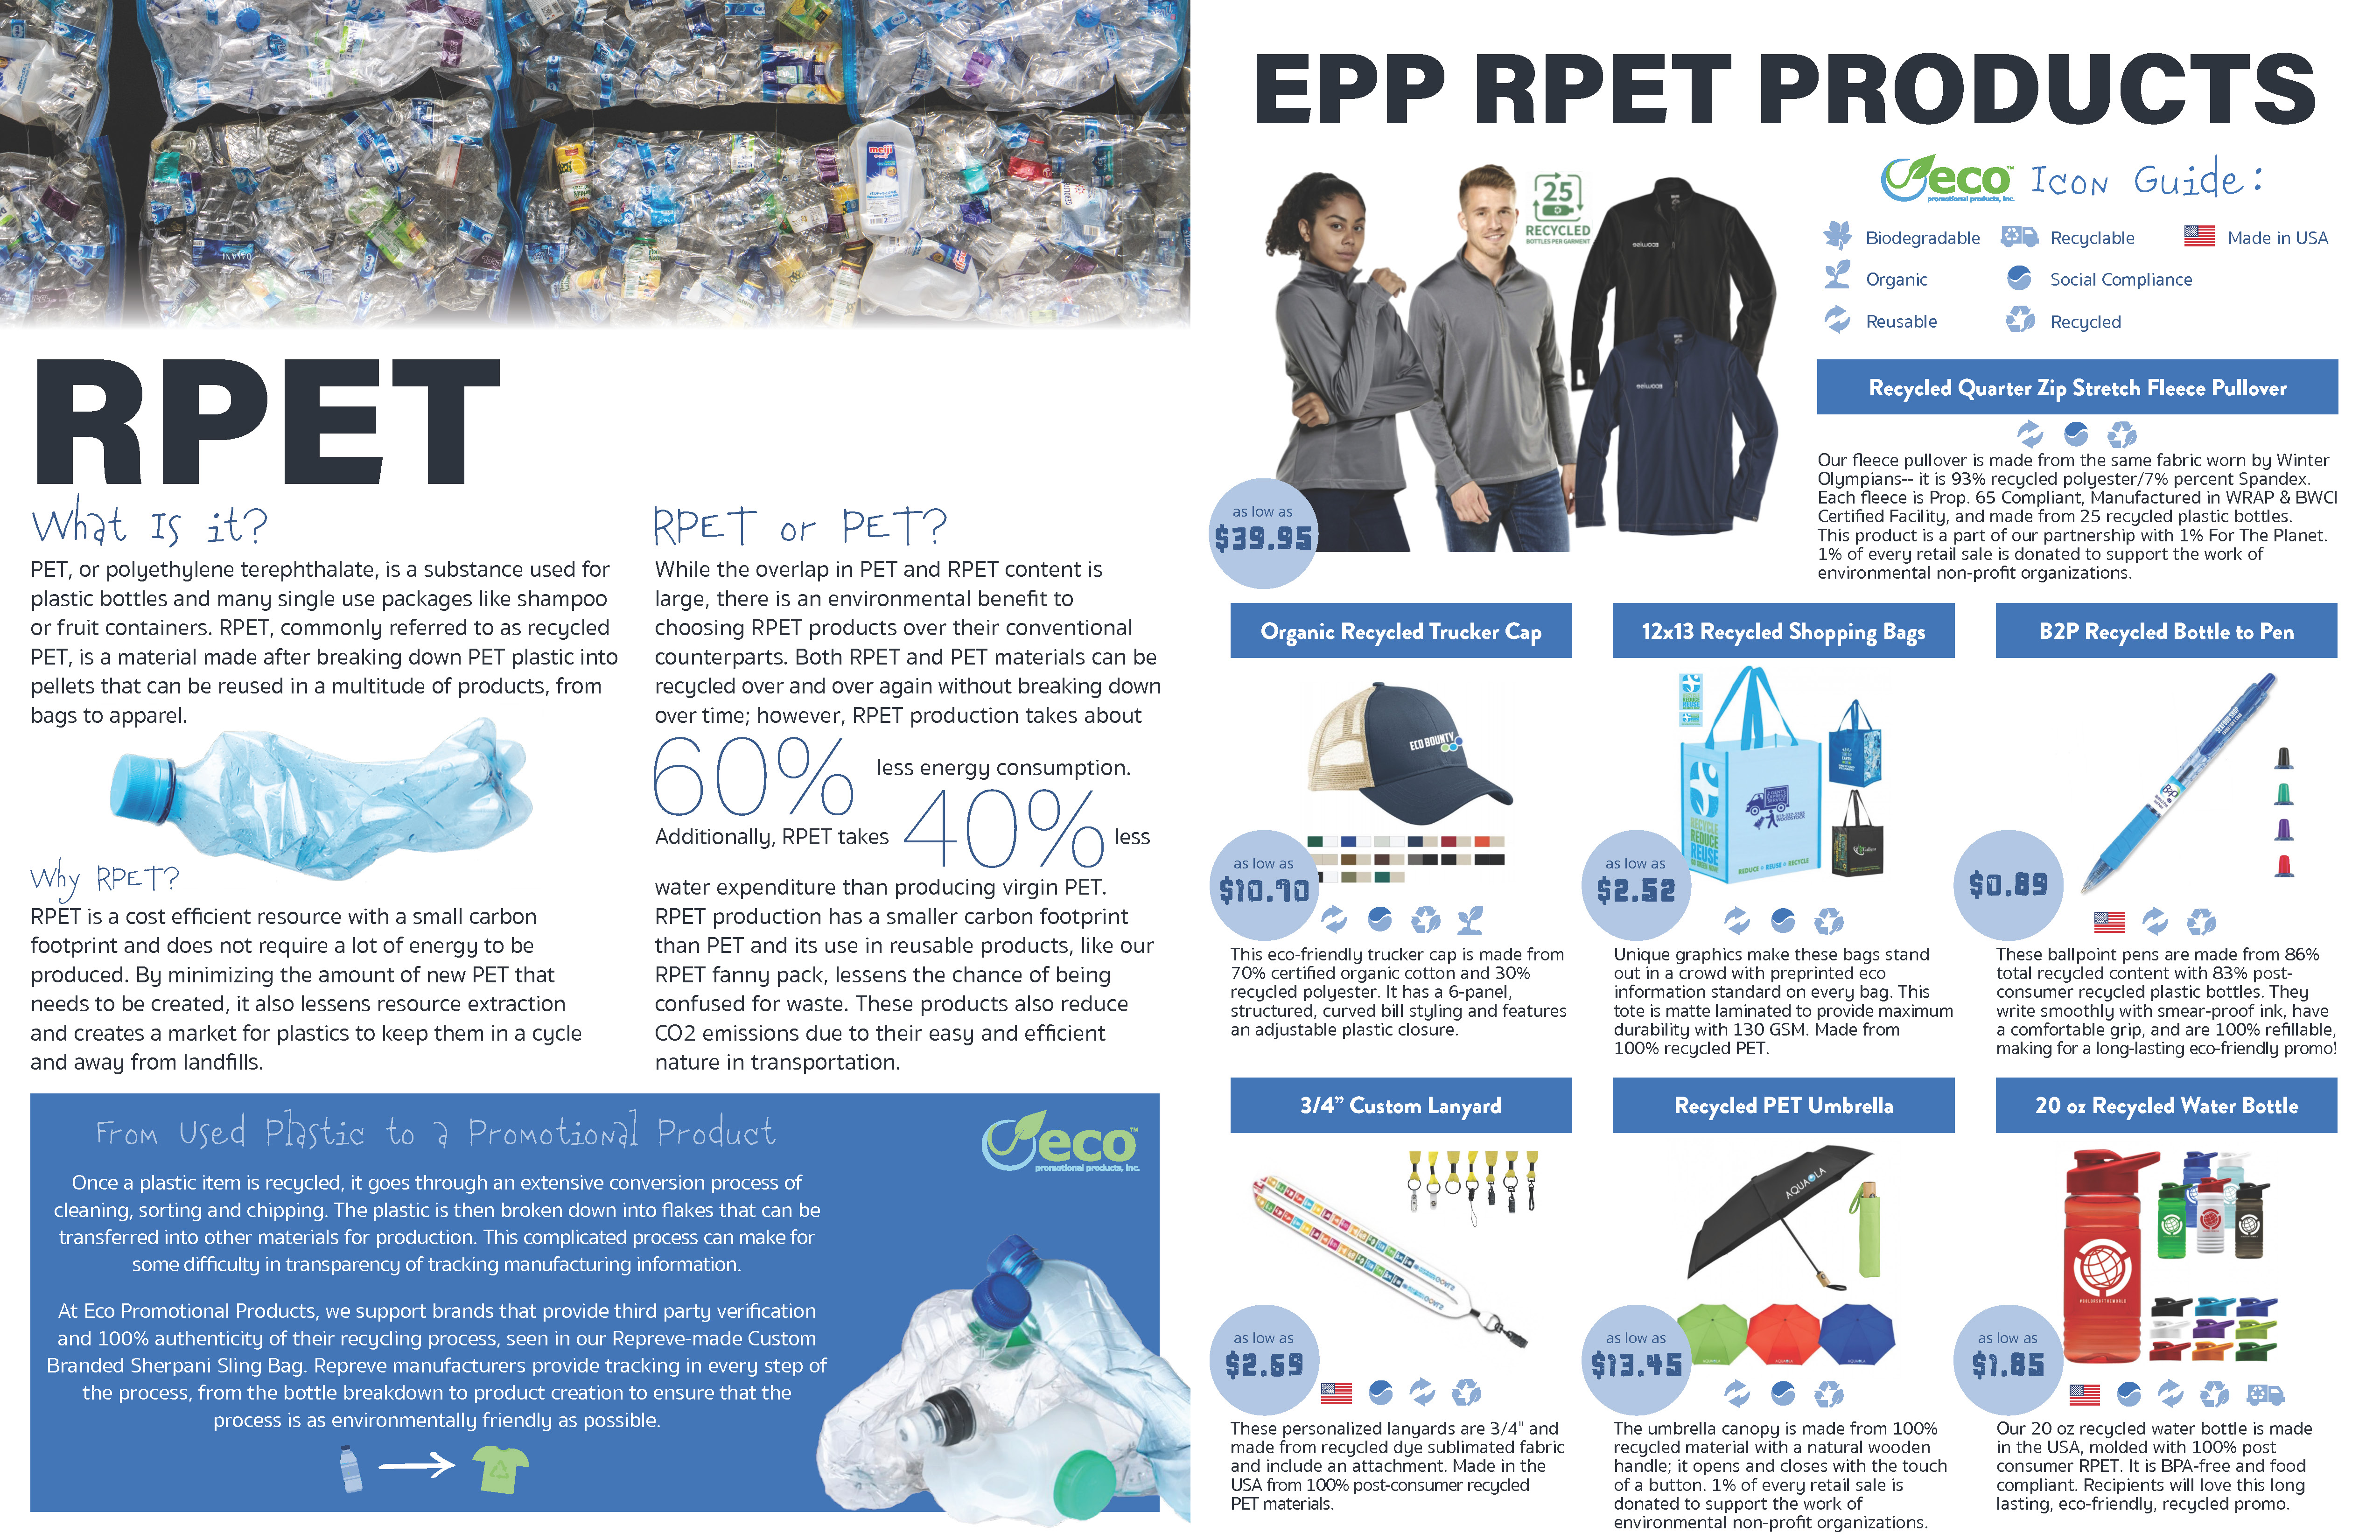 What is RPET?